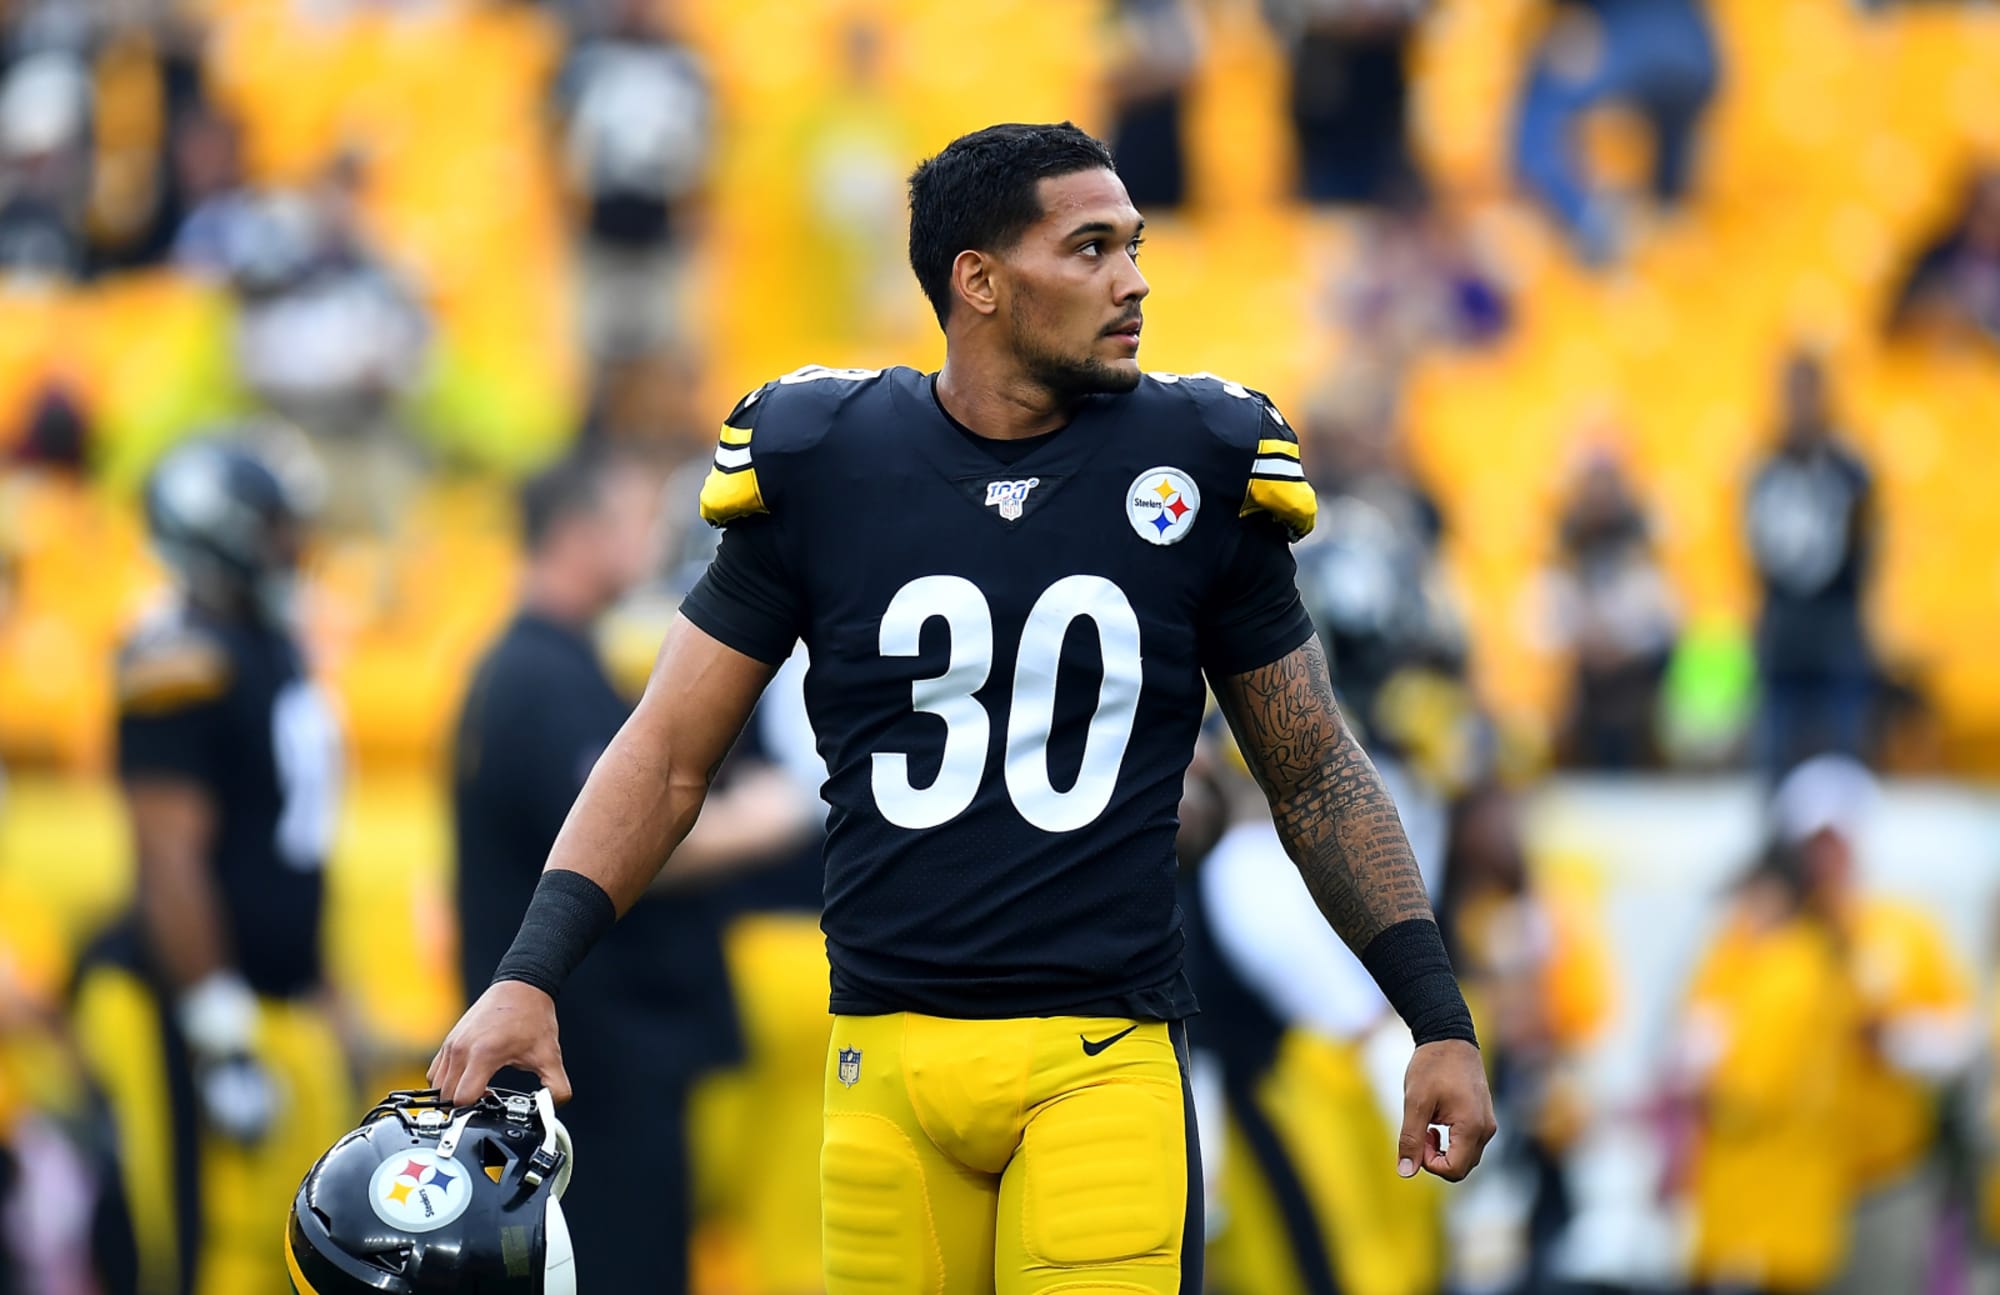 Is James Conner entering his last season with the Steelers?